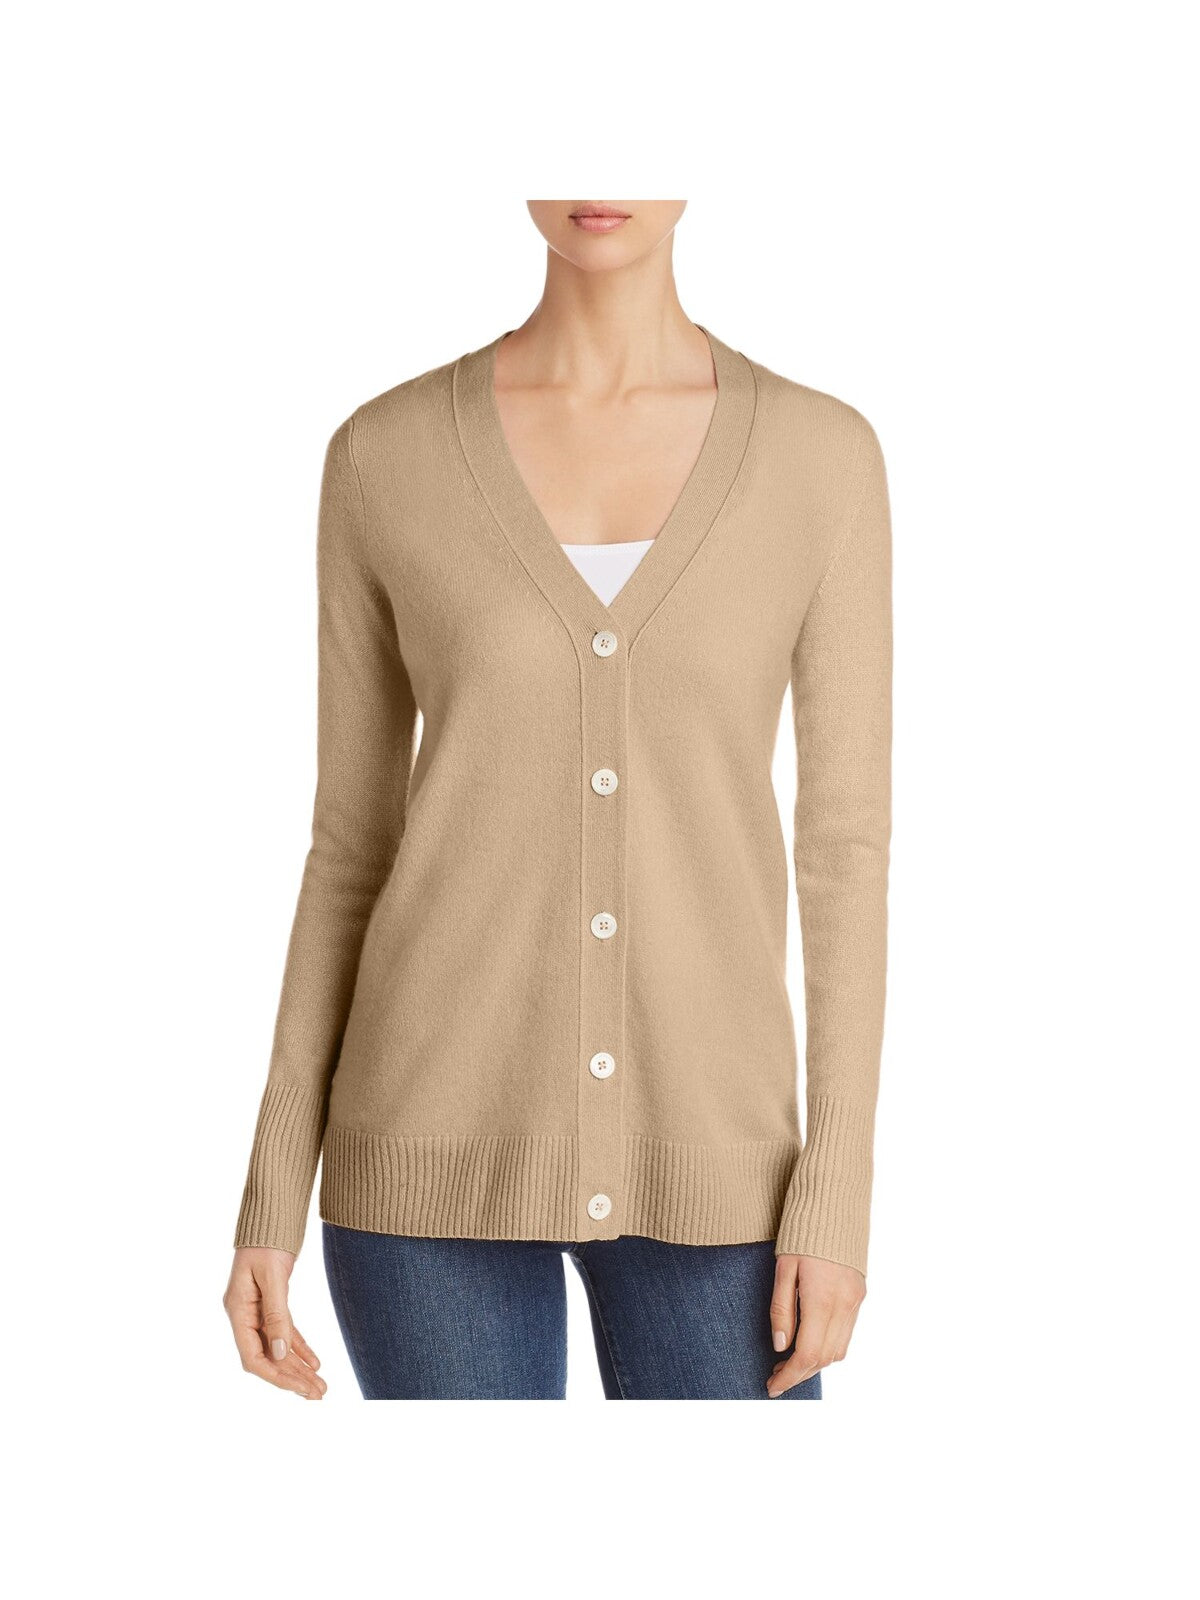 C Womens Beige Long Sleeve V Neck Button Up Sweater S